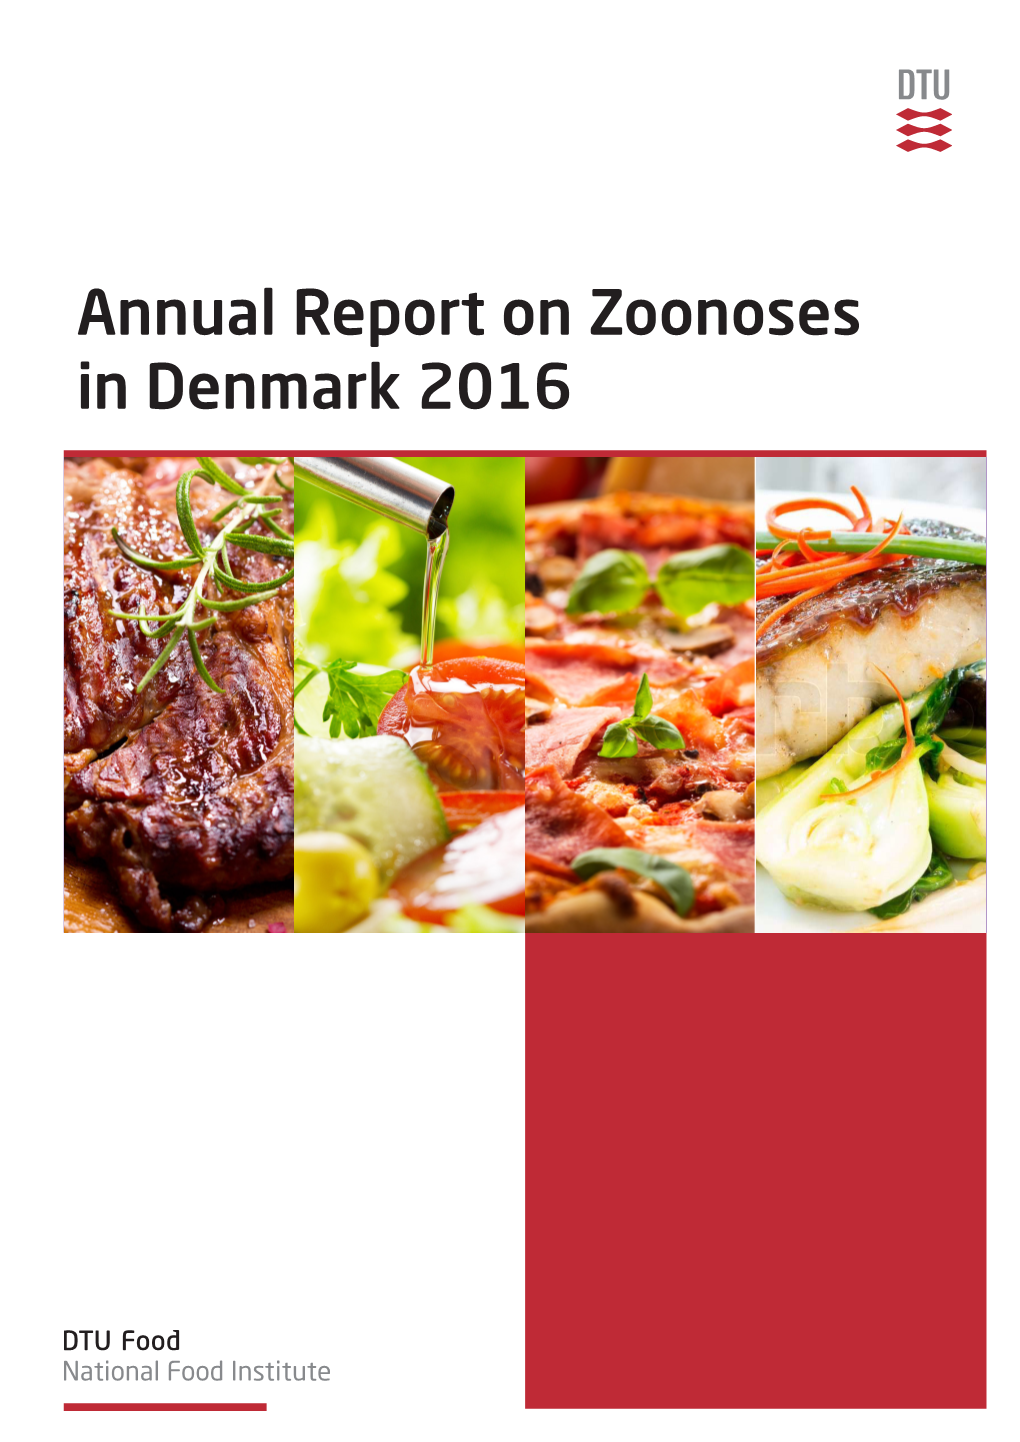 Annual Report on Zoonoses in Denmark 2016 Ii